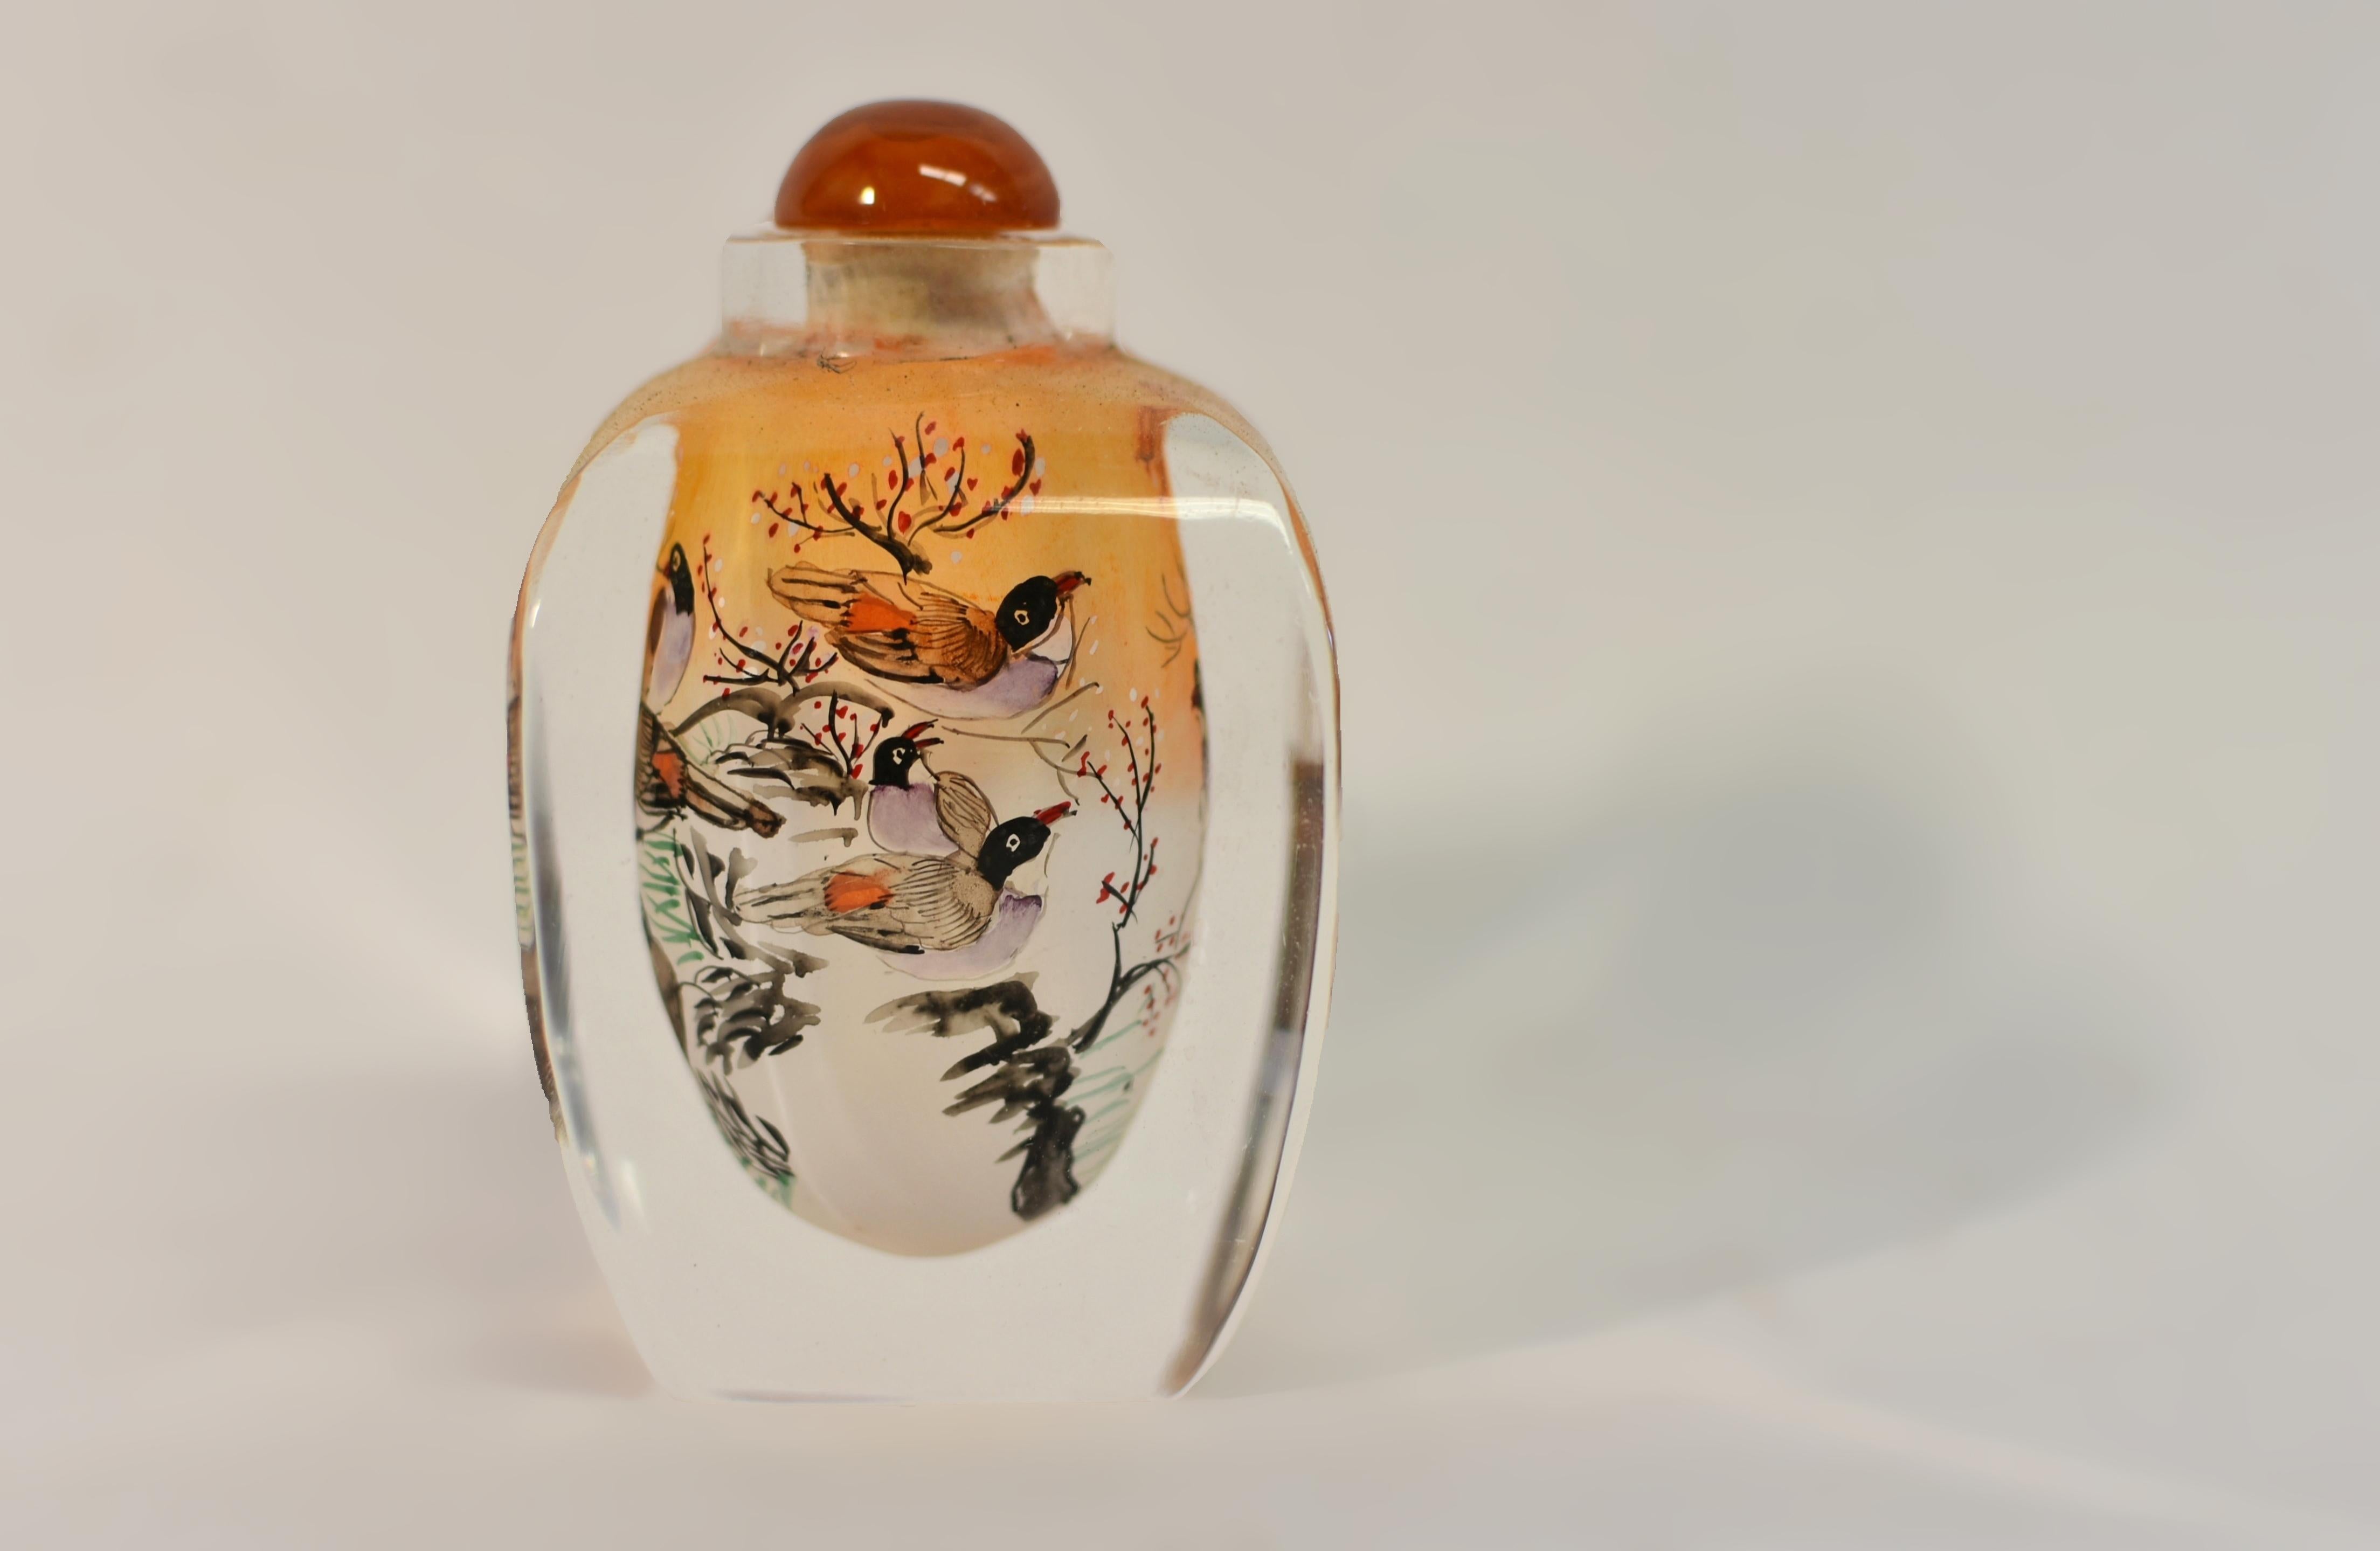 The Chinese eglomise snuff bottle is a captivating masterpiece, showcasing the delicate art of reverse painting from the inside. The scene depicted a group of birds perched on a prunus blossom tree in a serene snowy landscape with the symbolic